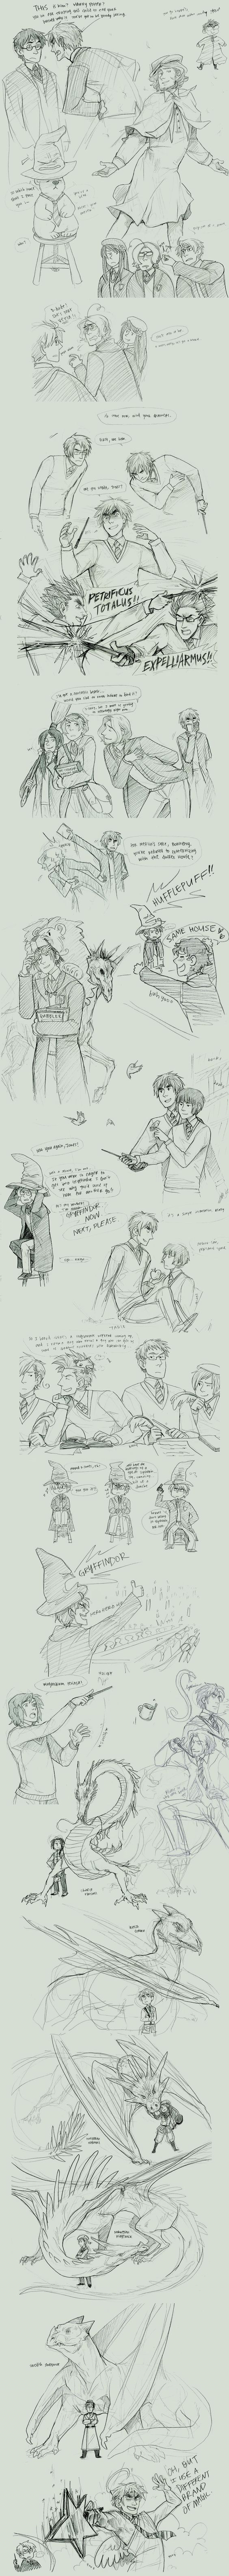 harry potter + the axis powers by ~Blue-Fox THIS IS AWSOME!- I died at Alfred trying to shoot the sorting hat